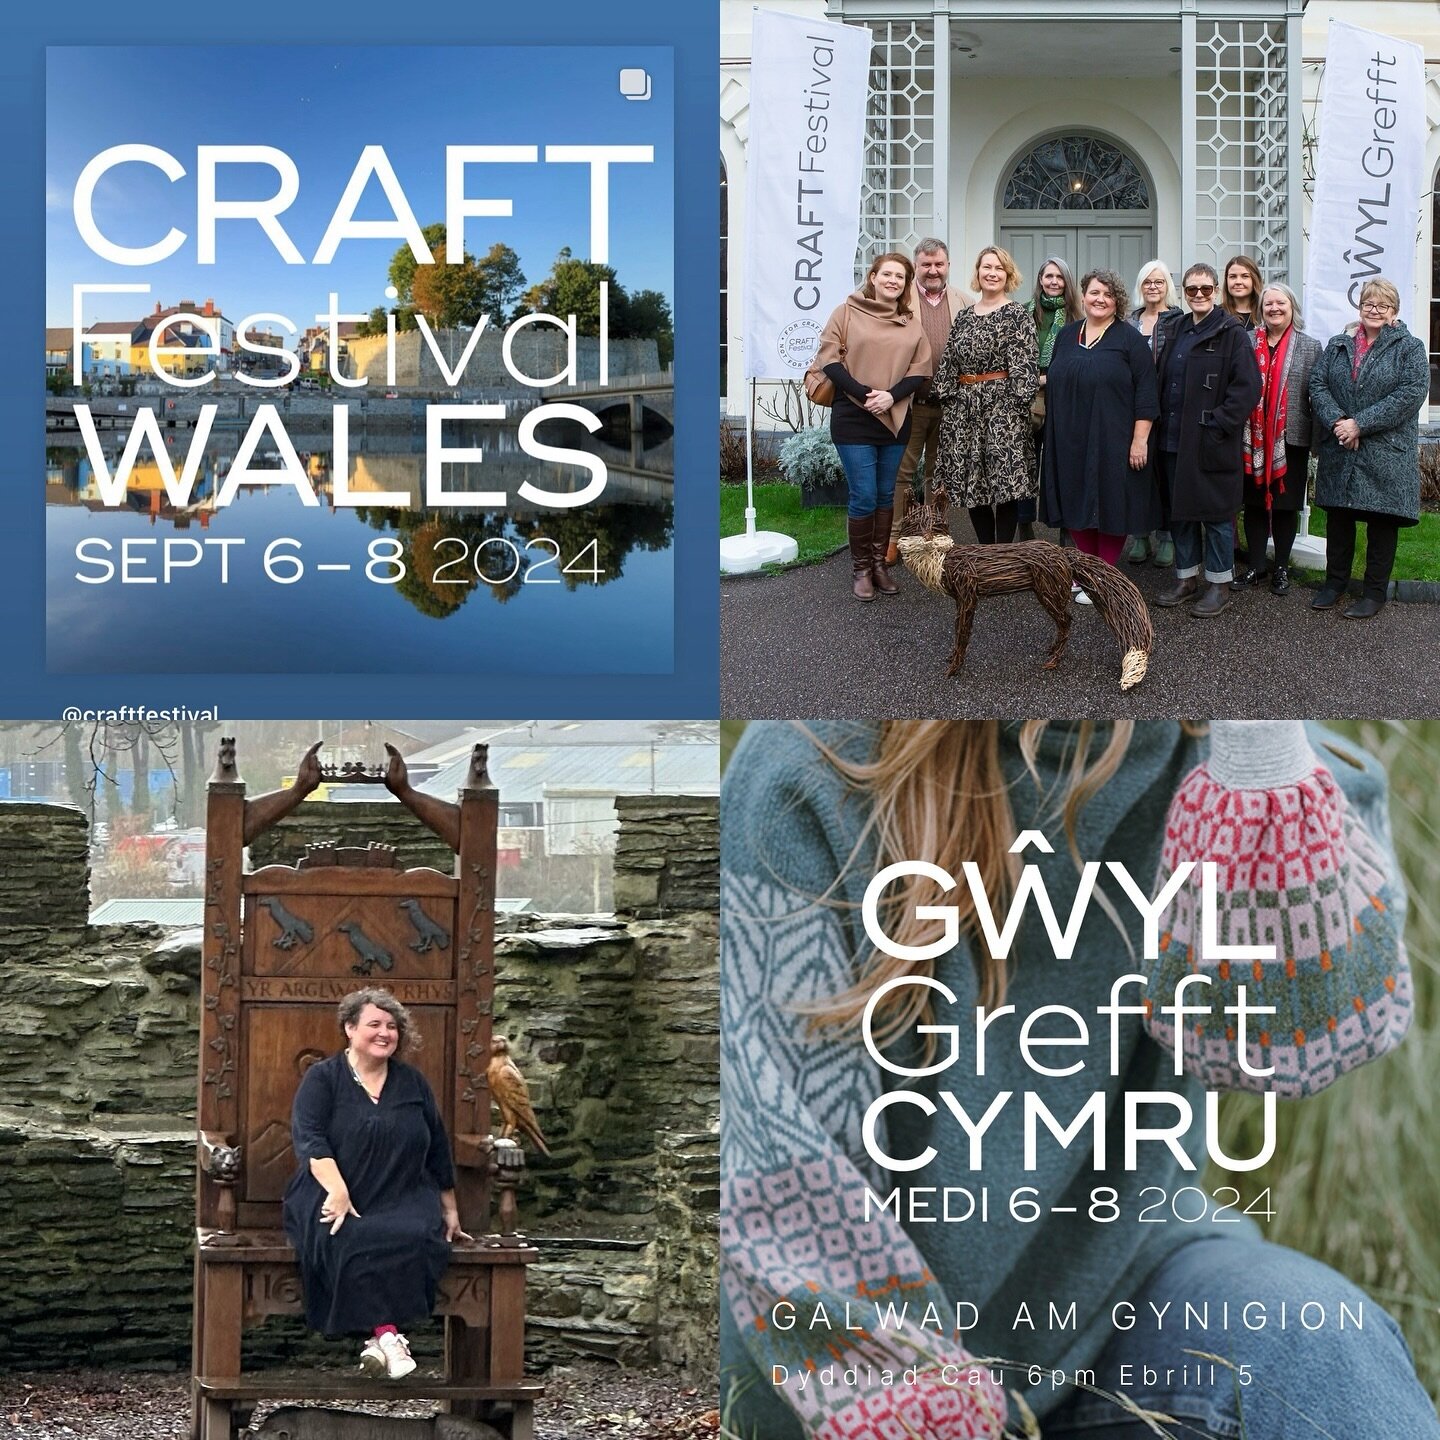 Sarah James has done it again! 😍

Sarah James MBE is the organiser of a highly successful portfolio of national contemporary craft events and has announced that she is to launch a brand-new event in her hometown of Cardigan. Craft Festival Wales wil